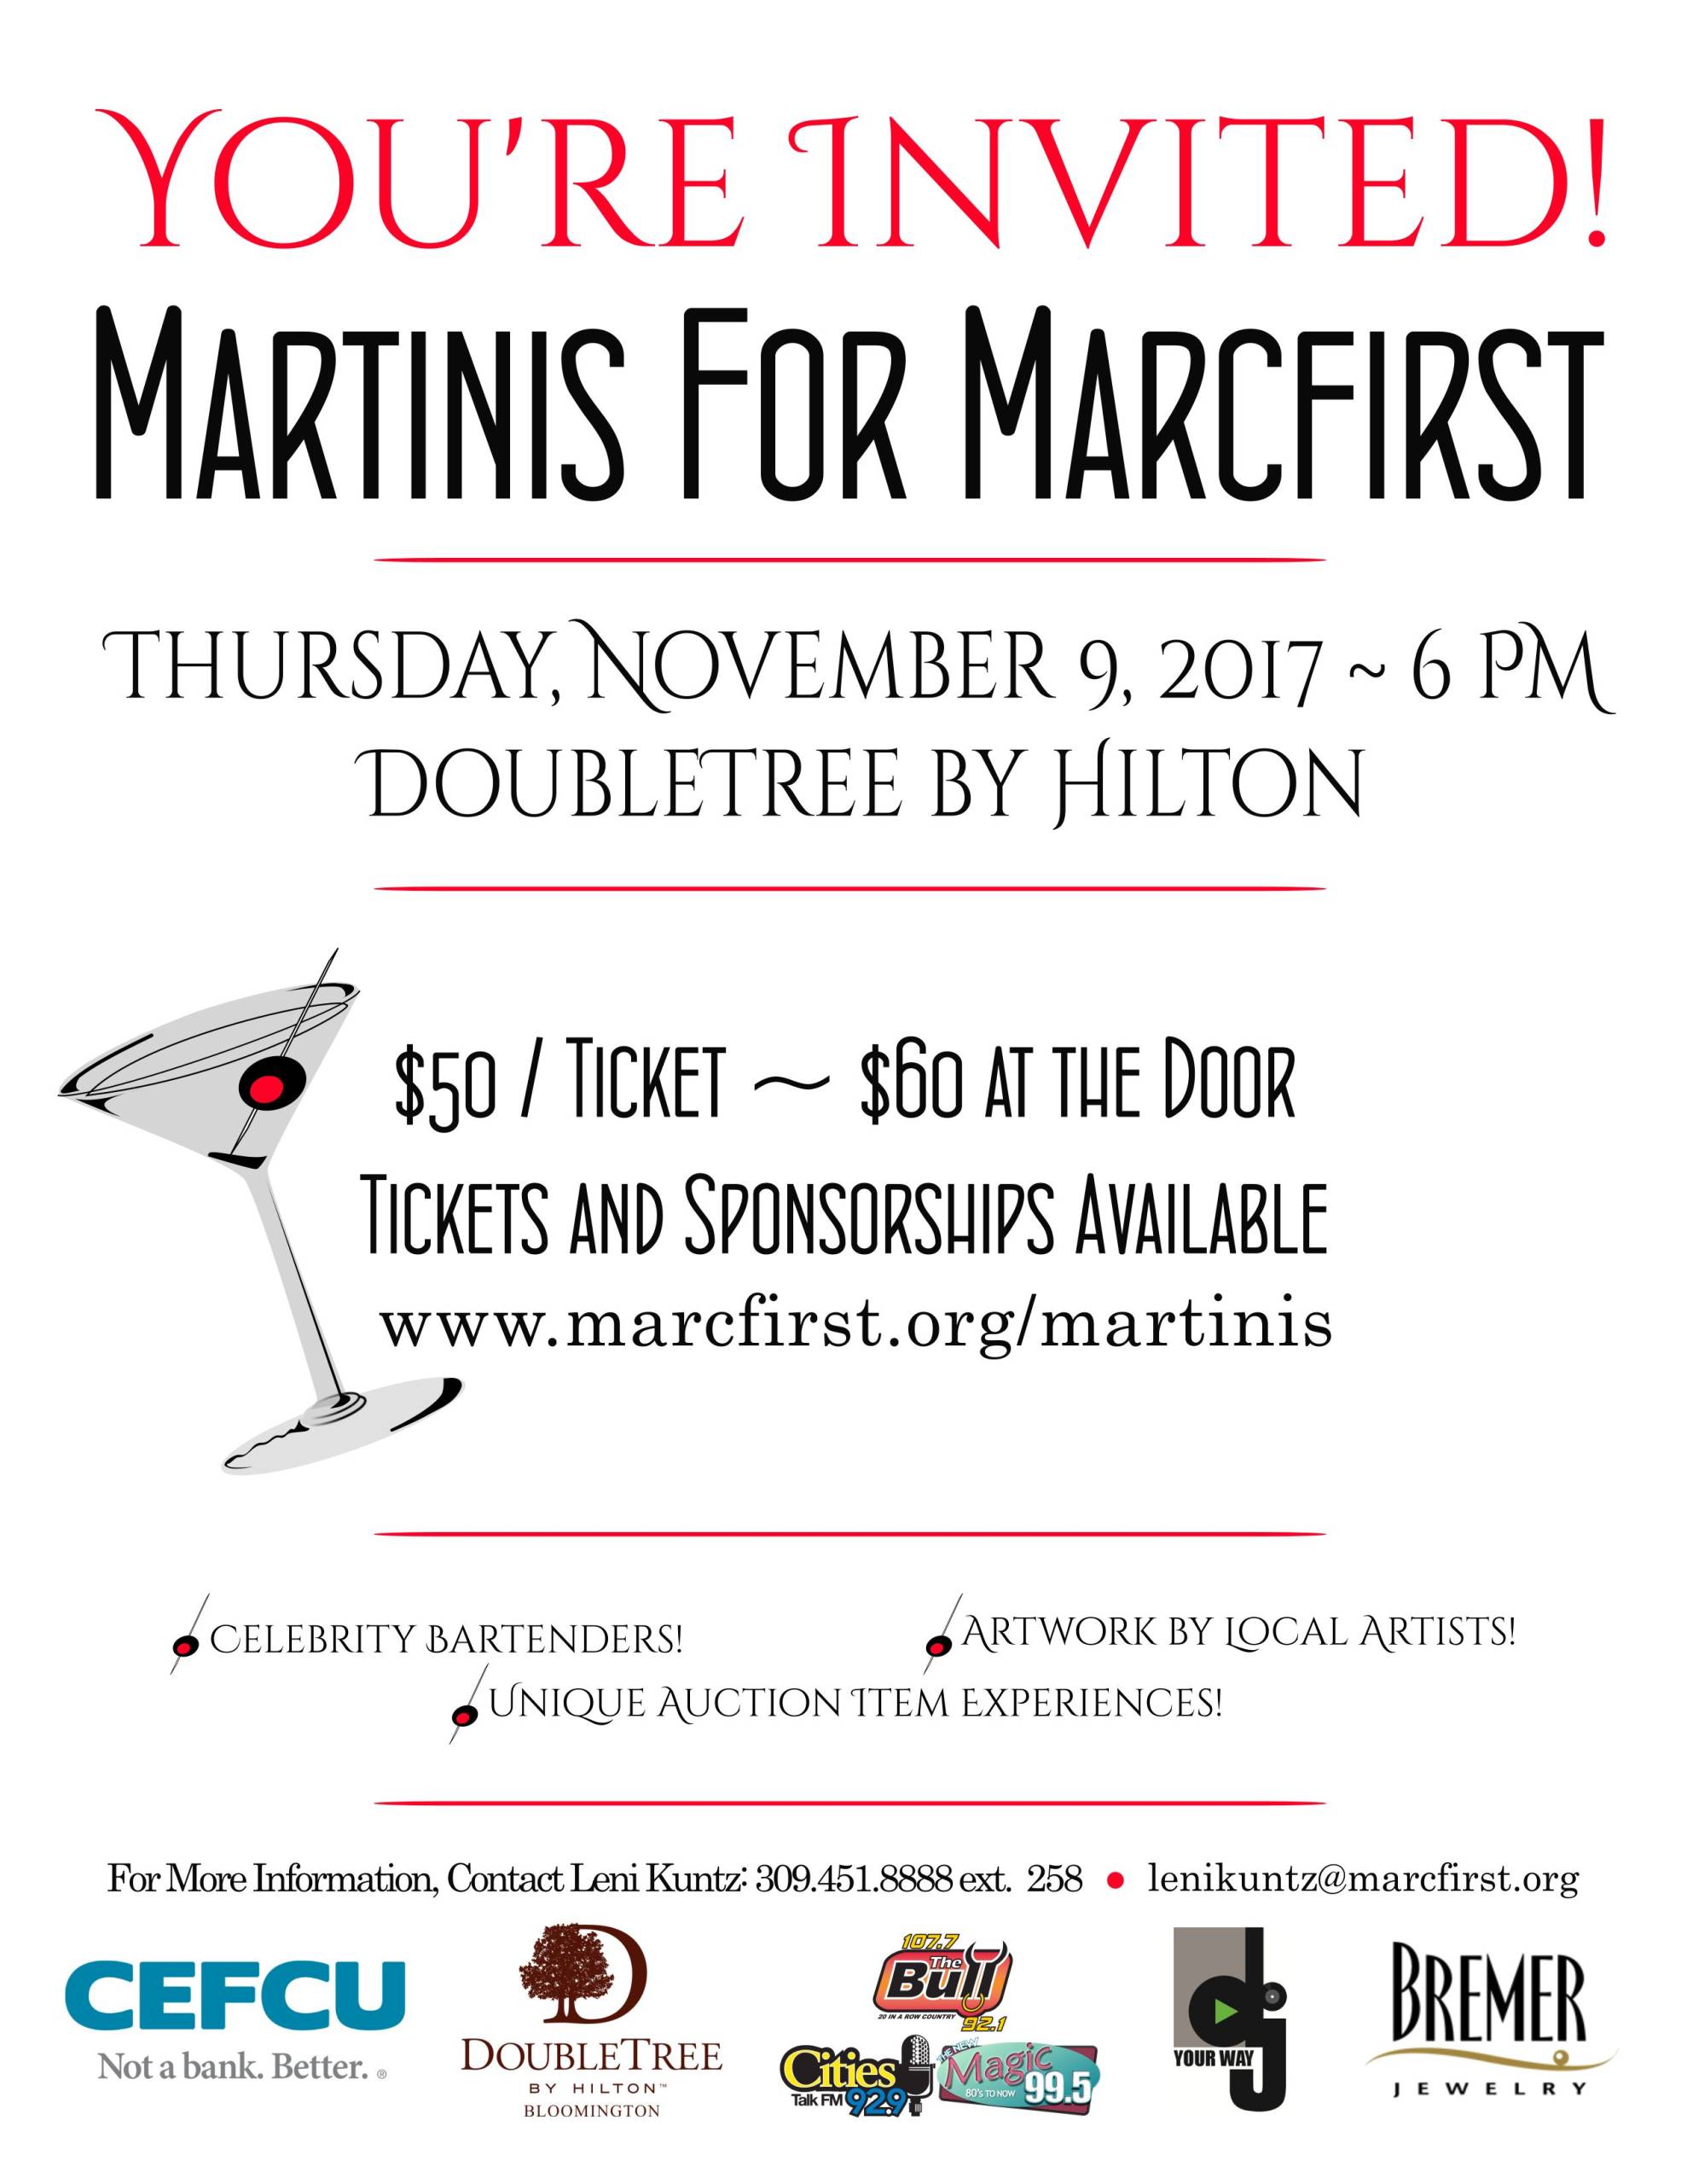 Martinis for Marcfirst